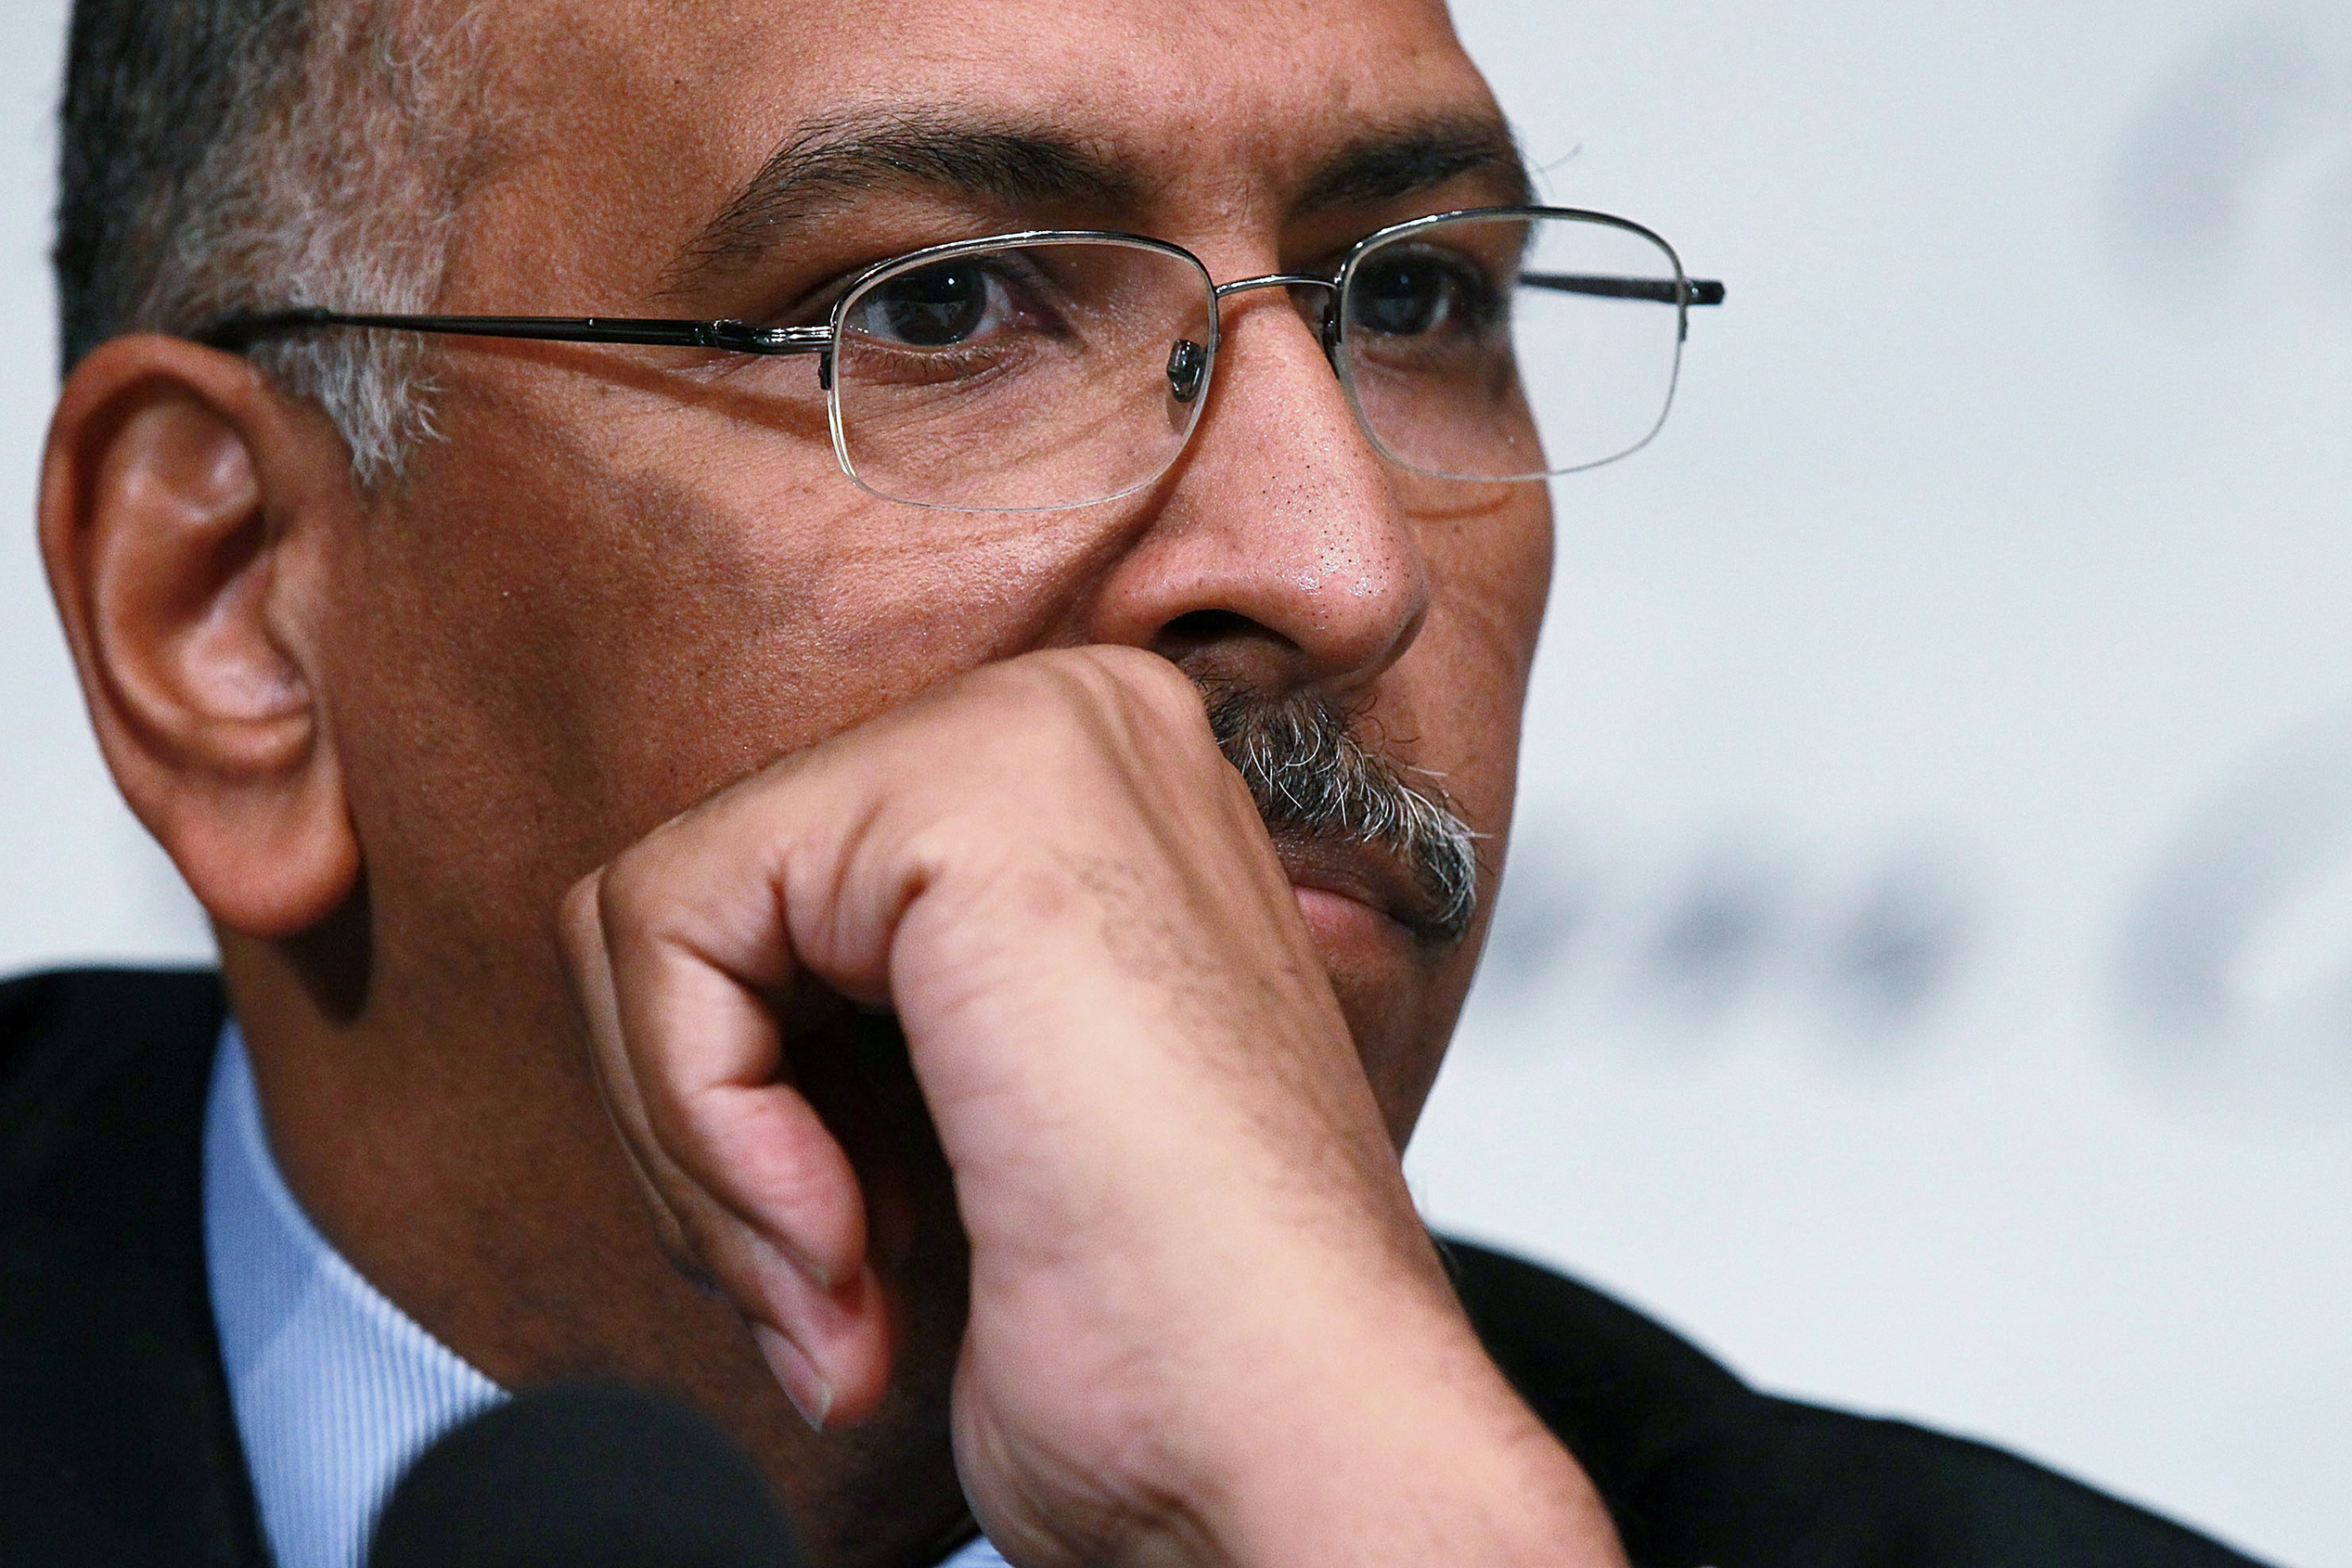 Former Republican National Committee Chairman Michael Steele participates in a debate between chairmanship candidates of the RNC, on Jan. 3, 2011 in Washington, D.C. (Alex Wong—Getty Images)